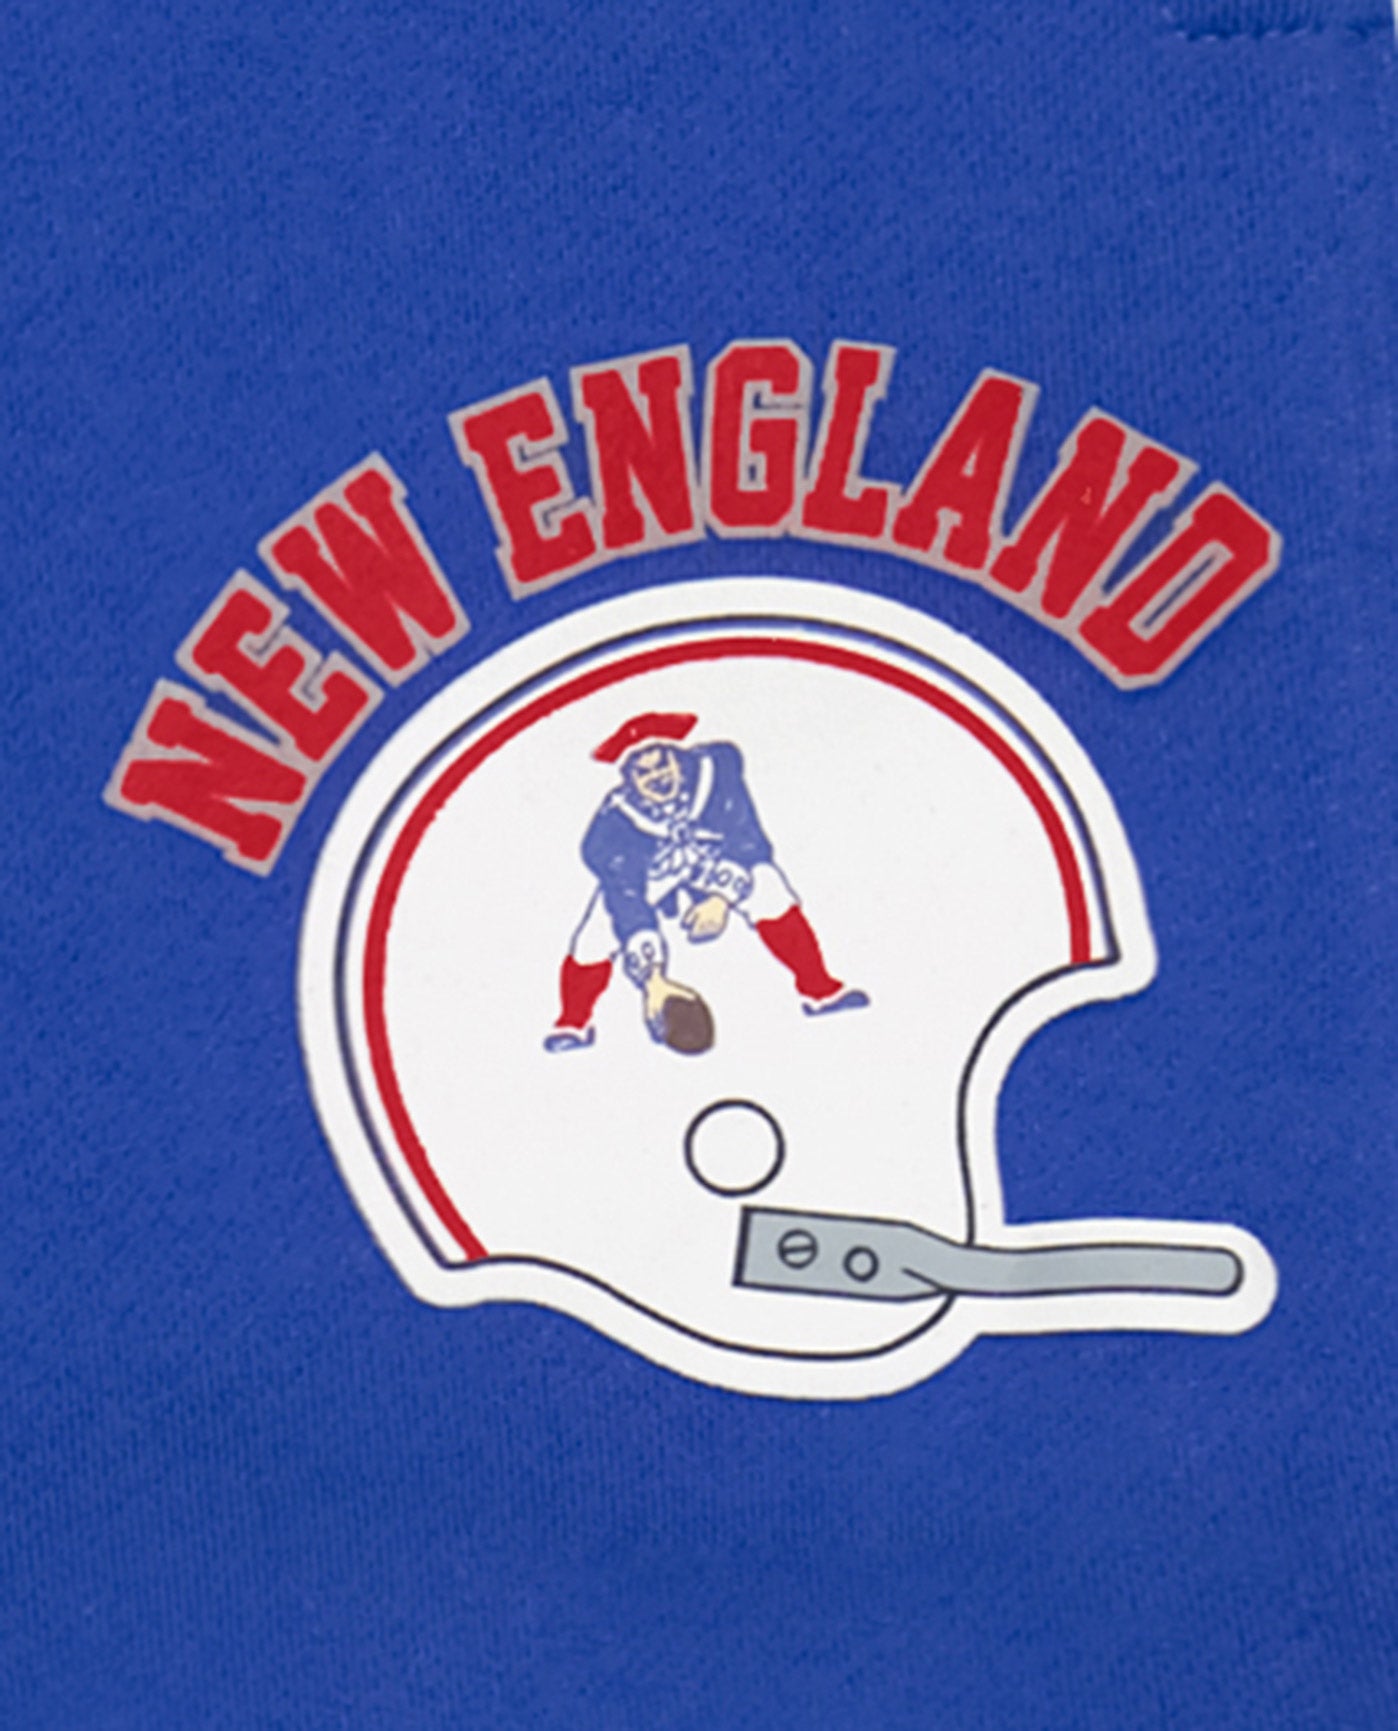 NEW ENGLAND writing and helmet logo front | Patriots Blue